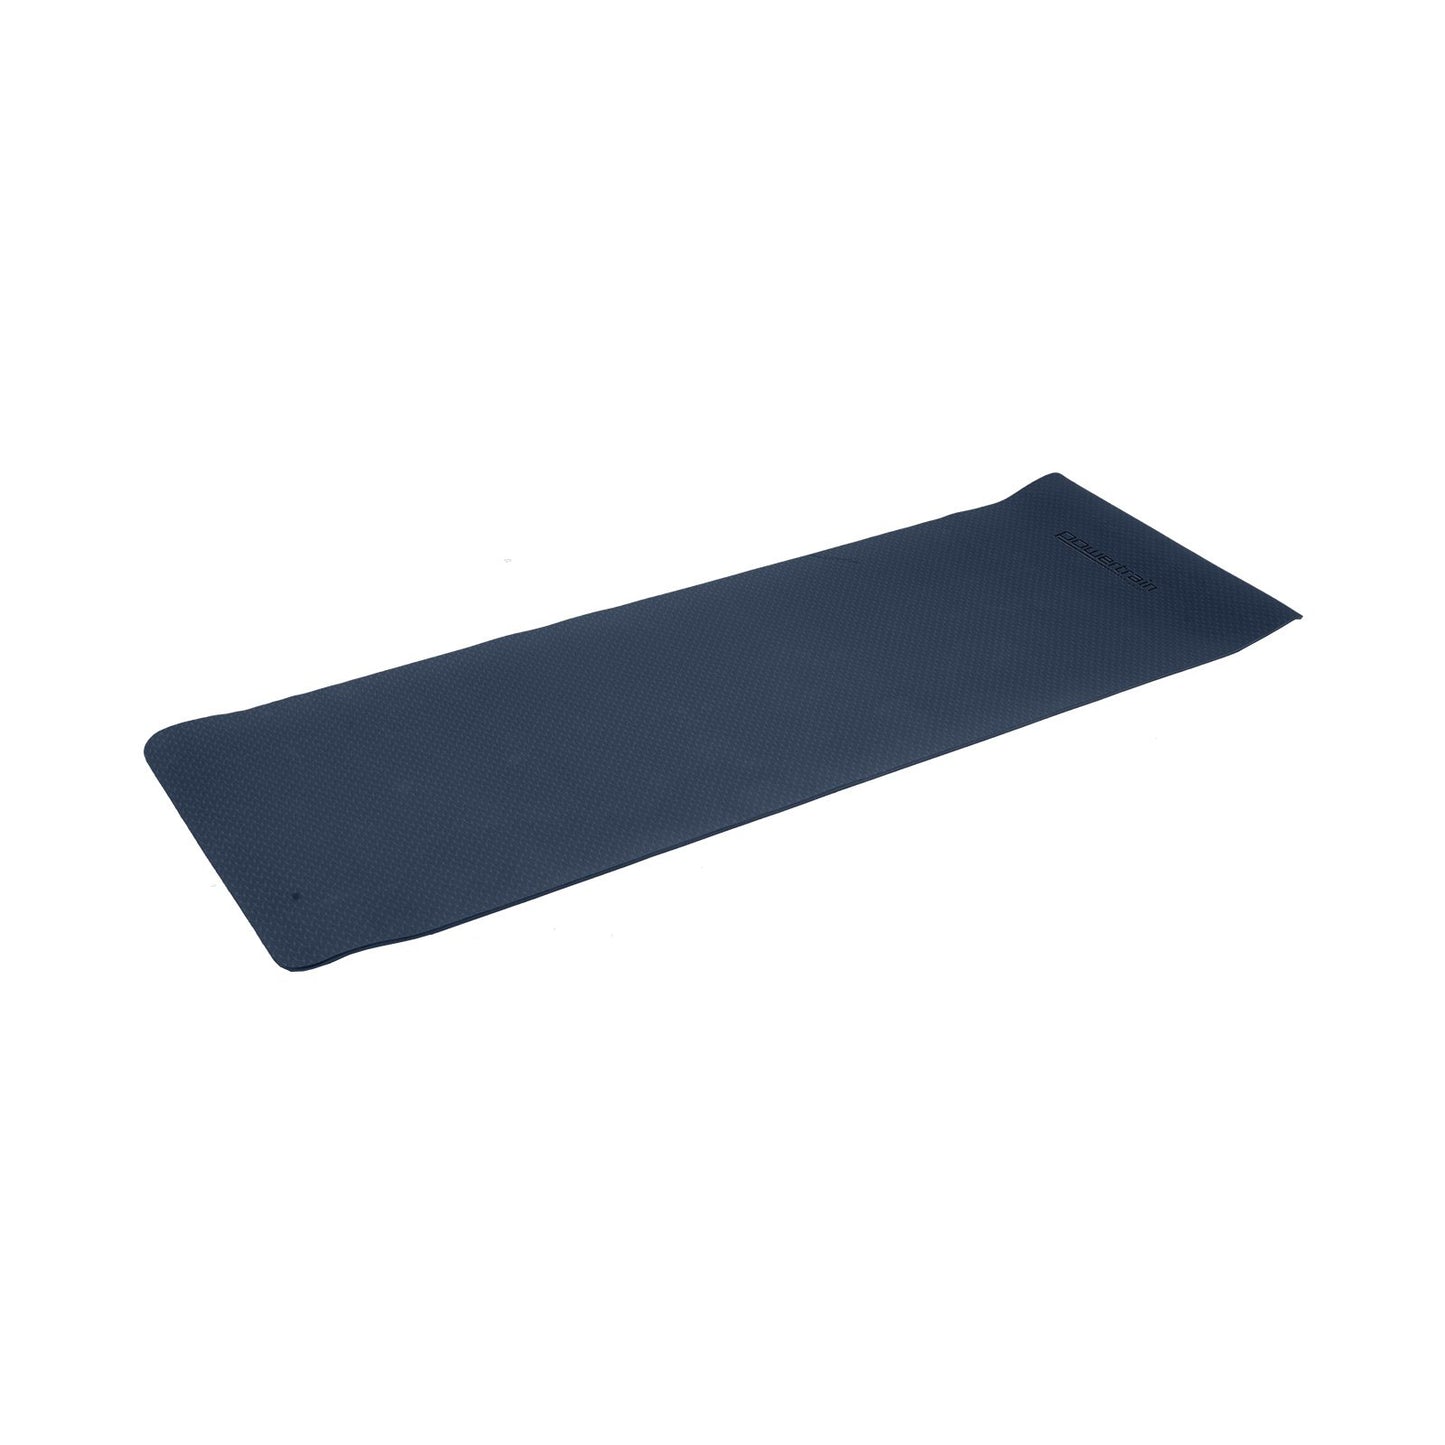 Powertrain Eco-friendly Dual Layer 6mm Yoga Mat | Navy | Non-slip Surface And Carry Strap For Ultimate Comfort And Portability